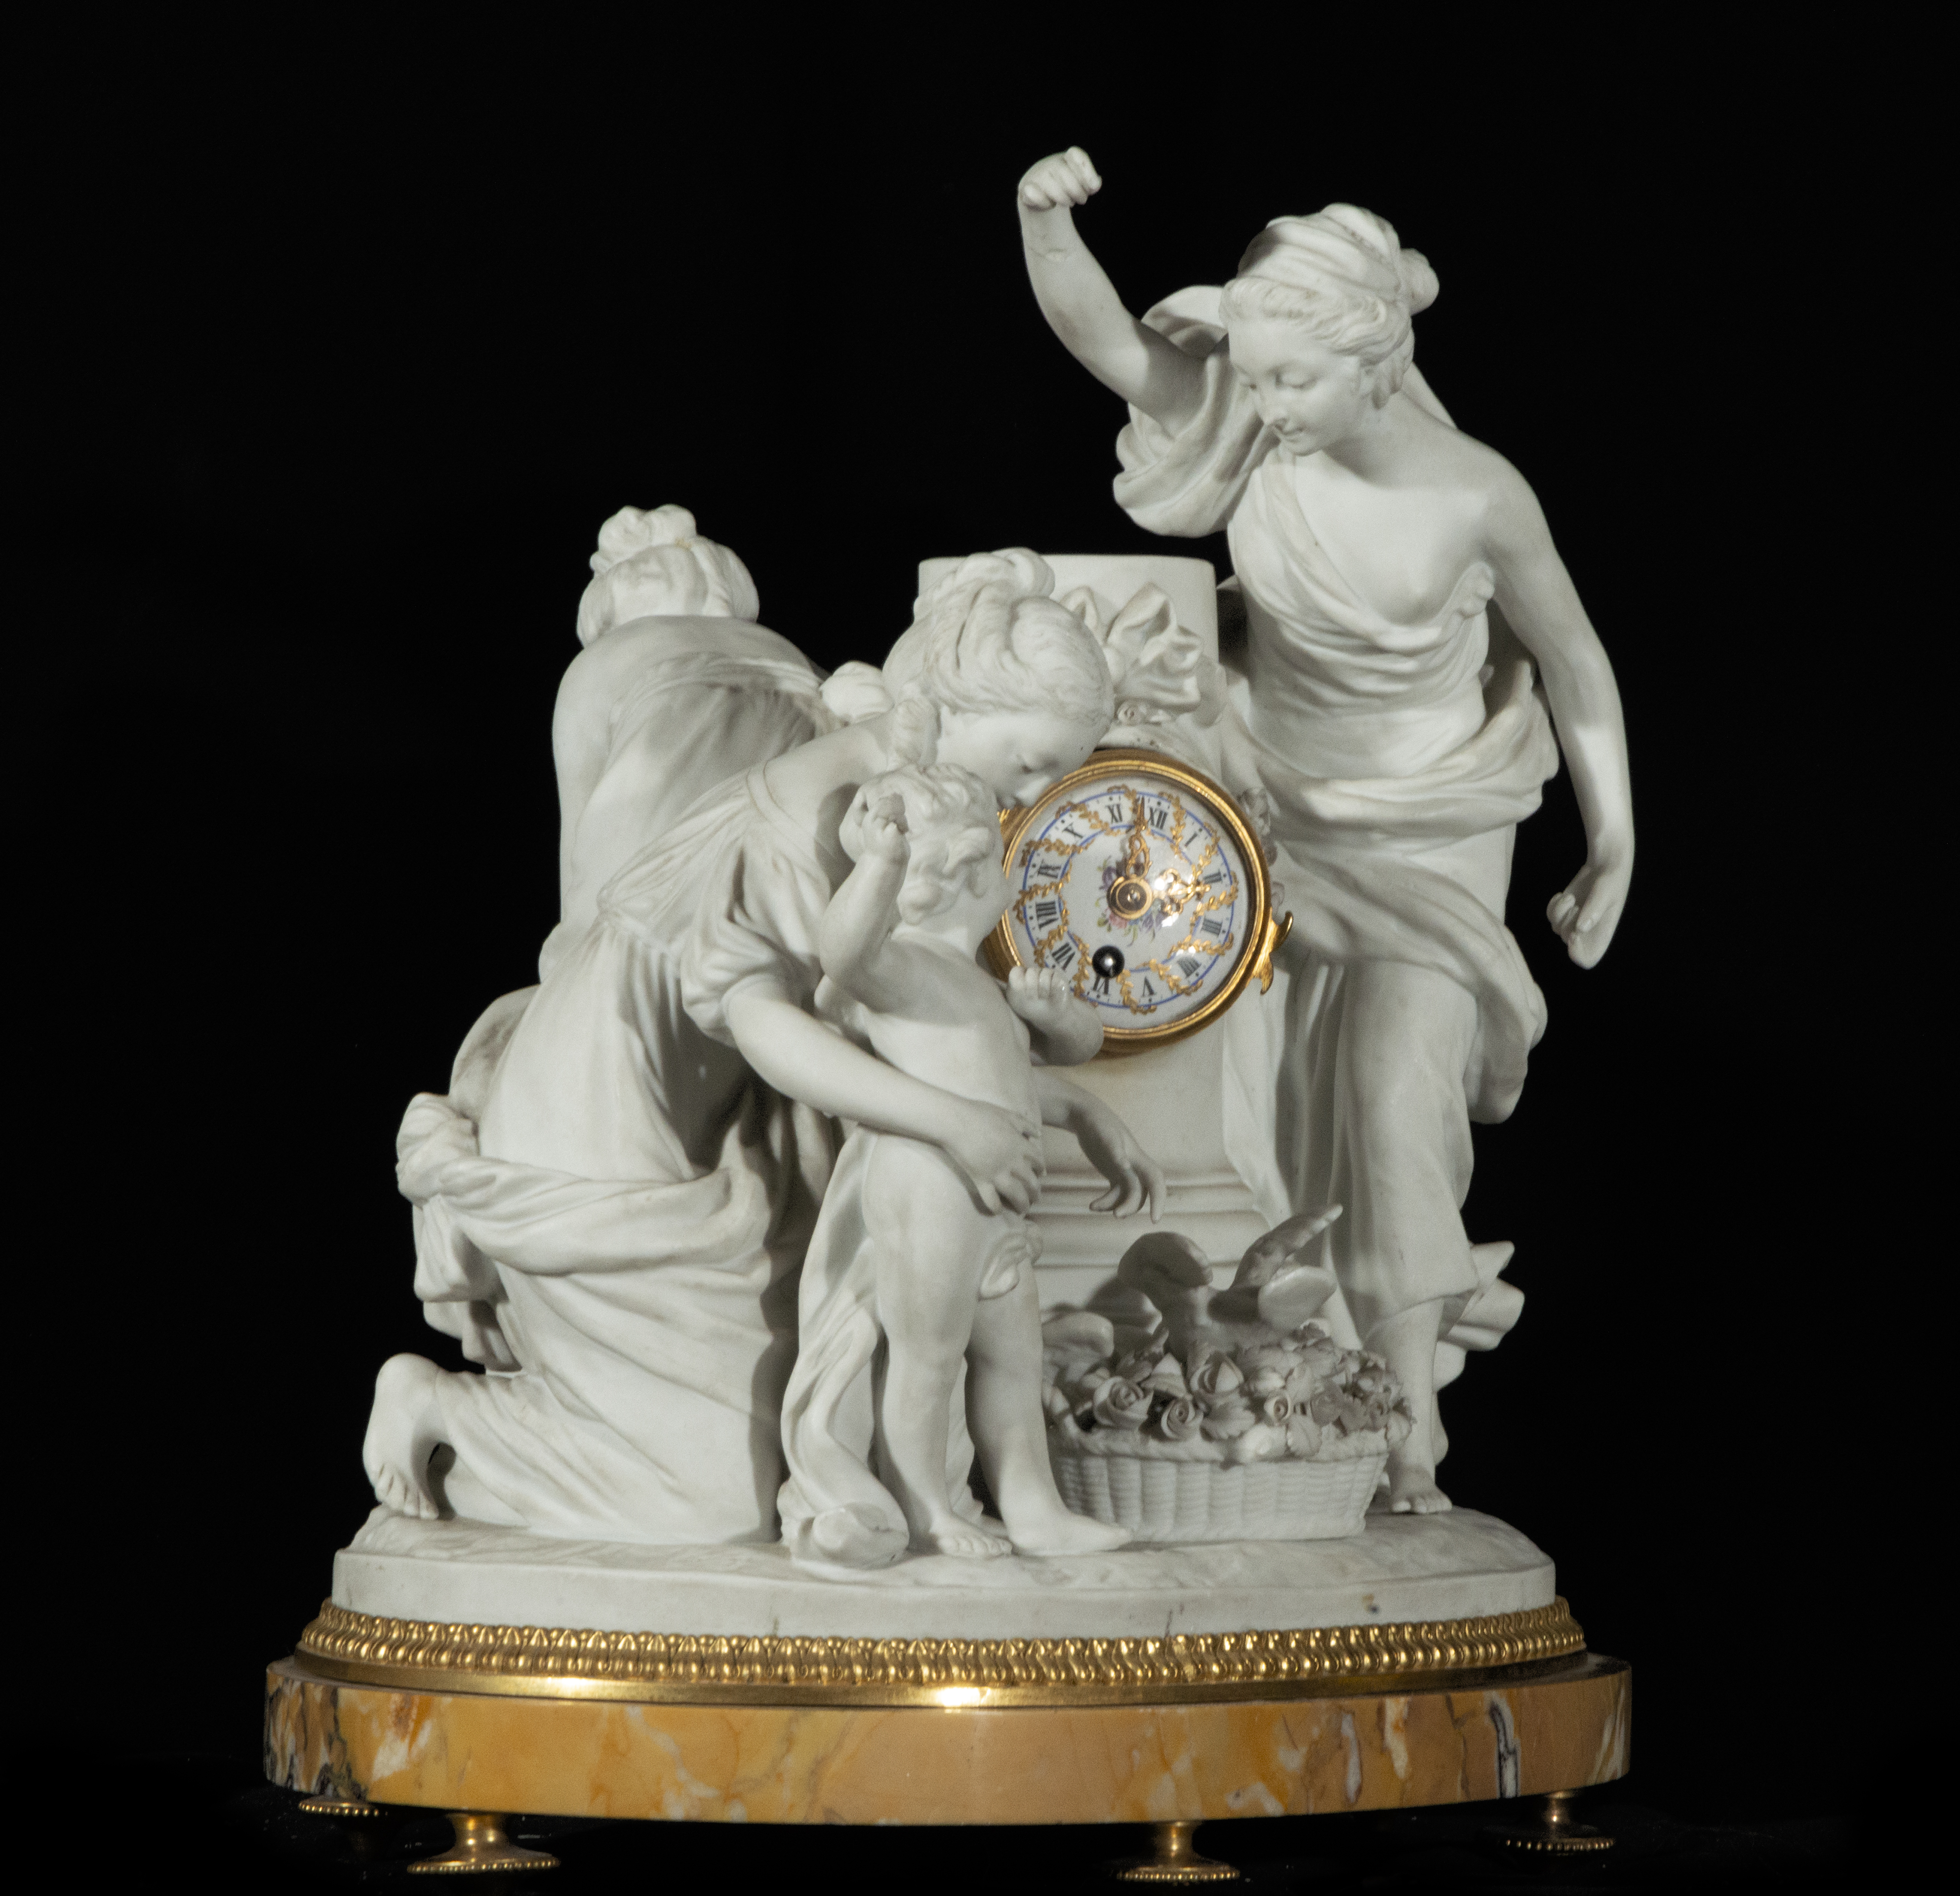 Elegant Louis XVI table clock in Siena marble, gilt bronze, and biscuit porcelain from Sèvres, late  - Image 3 of 4